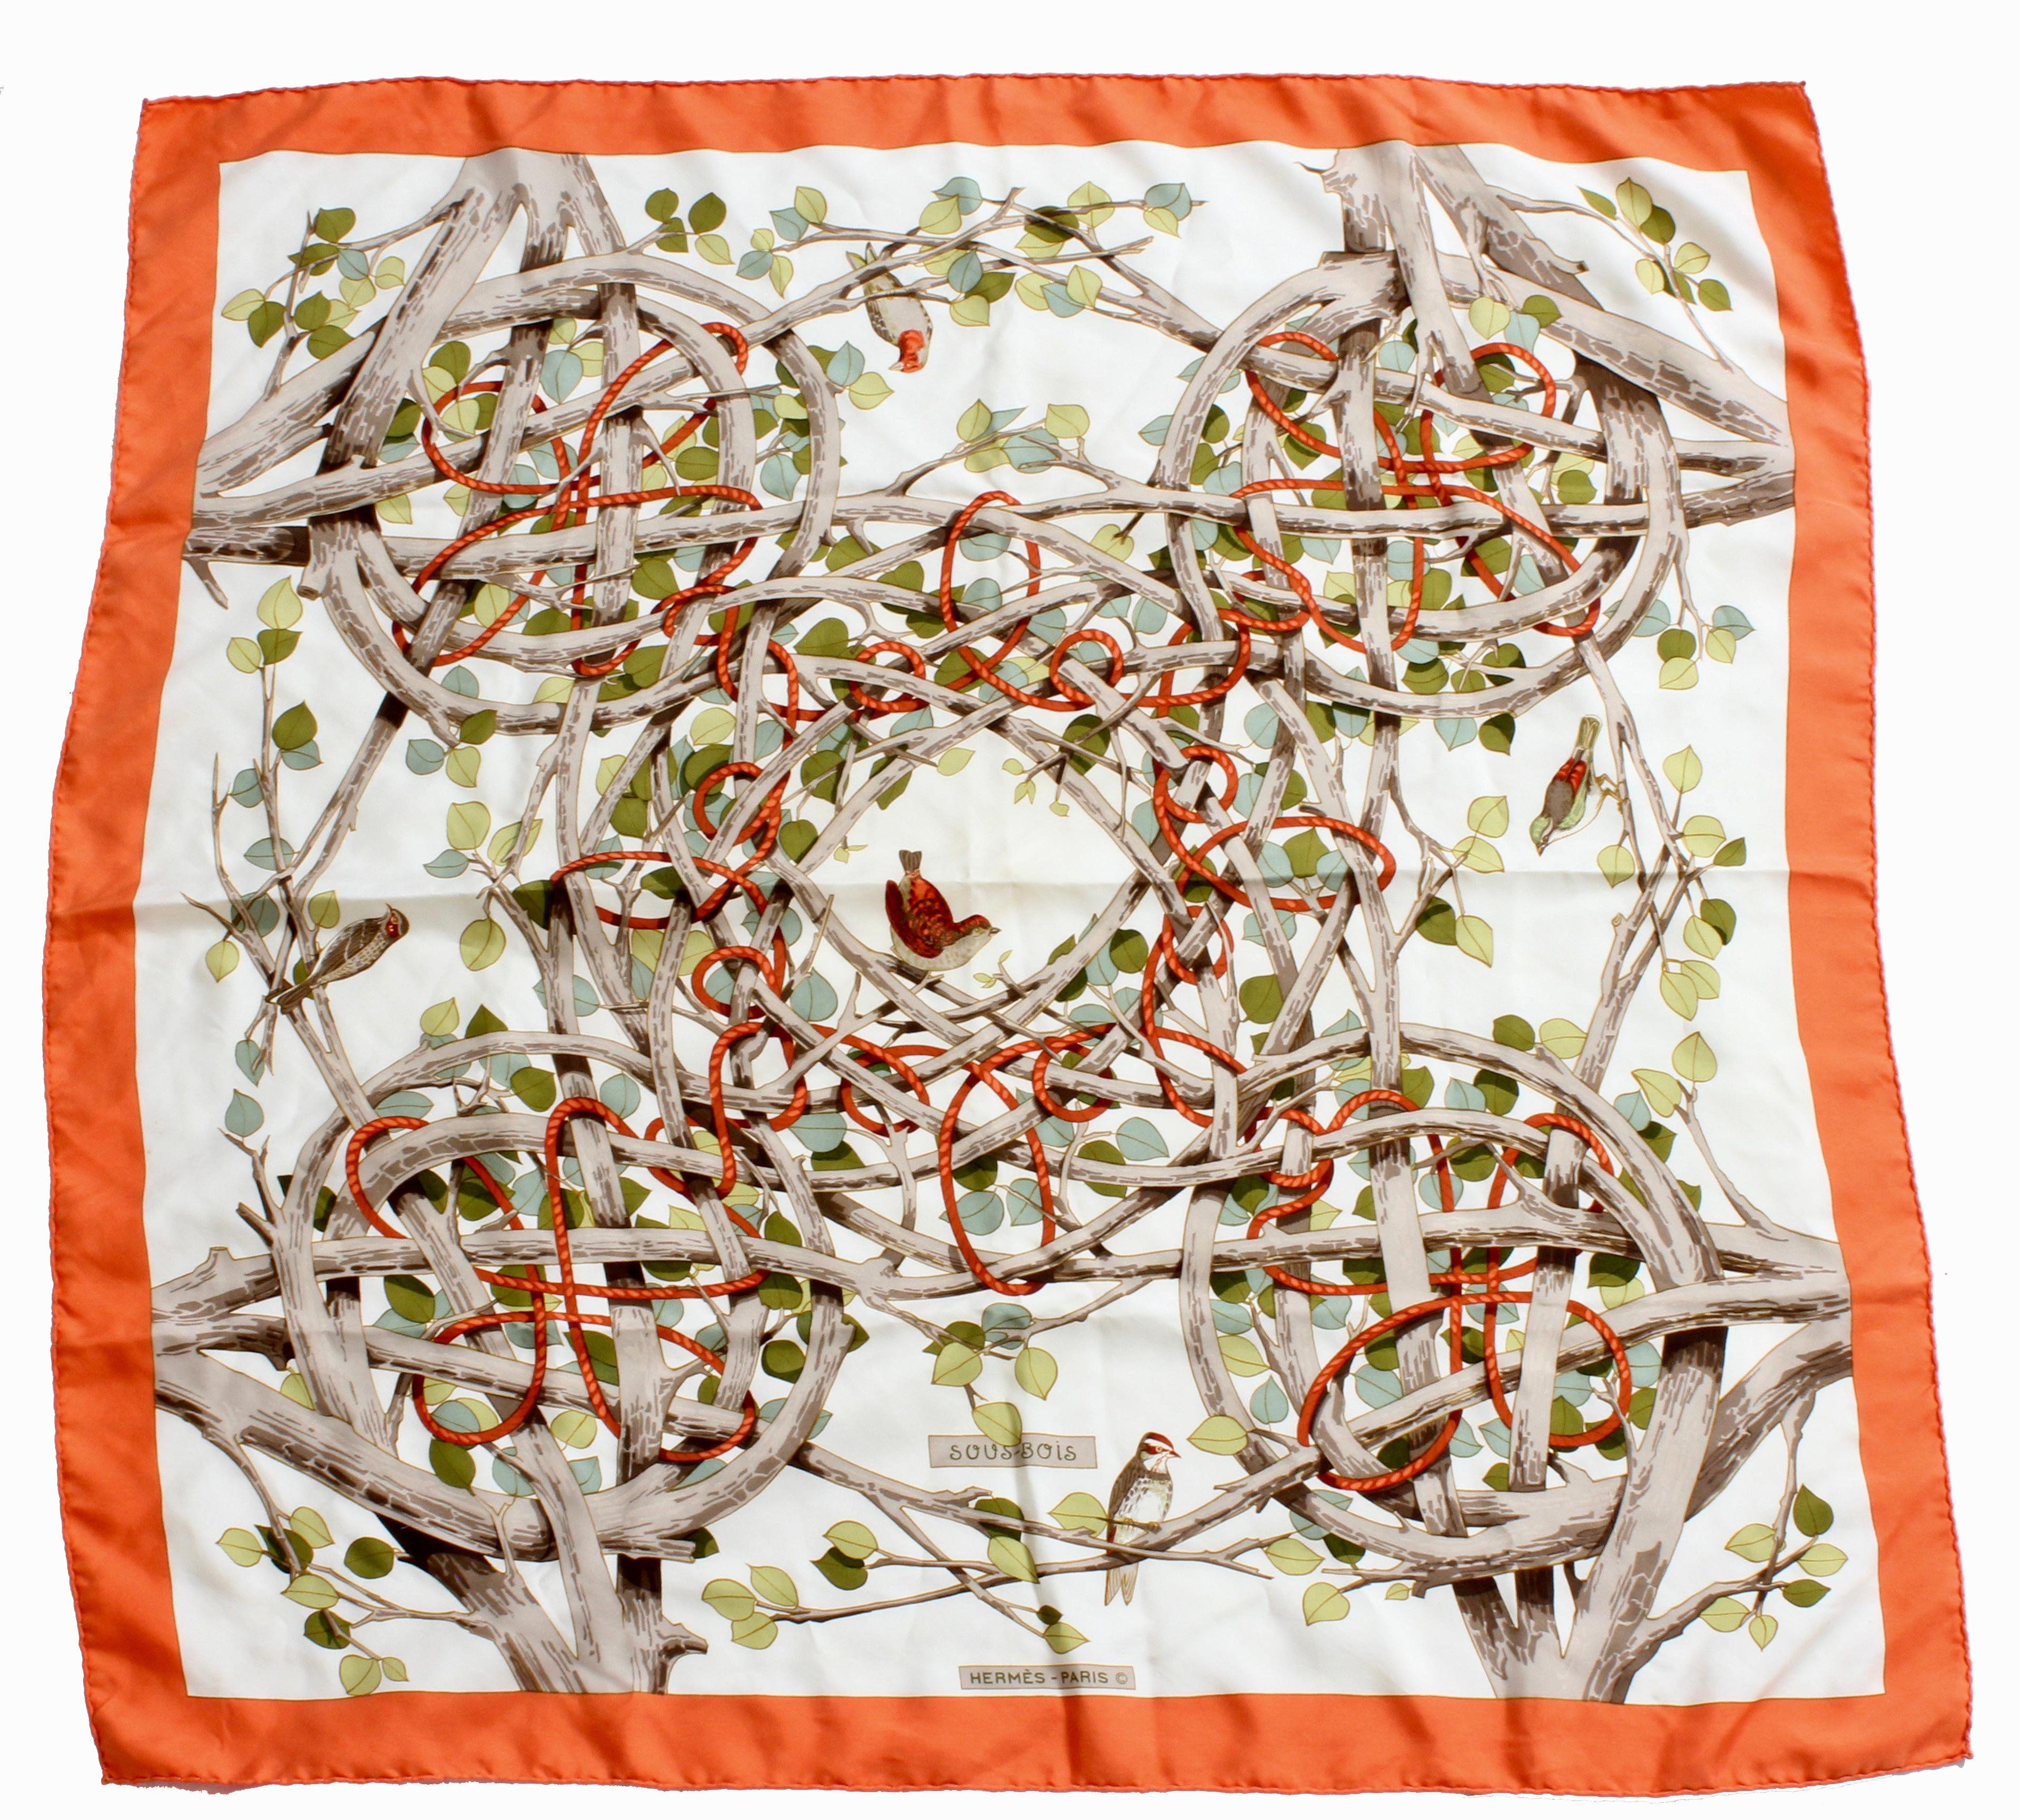 This fabulous and rare silk twill scarf or shawl was made by Hermes, most likely in the mid 1950s.  Designed by artist Francoise Heron, this piece is titled Sous-Bois, and features birds nestled within leafy branches and rope. Made from silk twill,